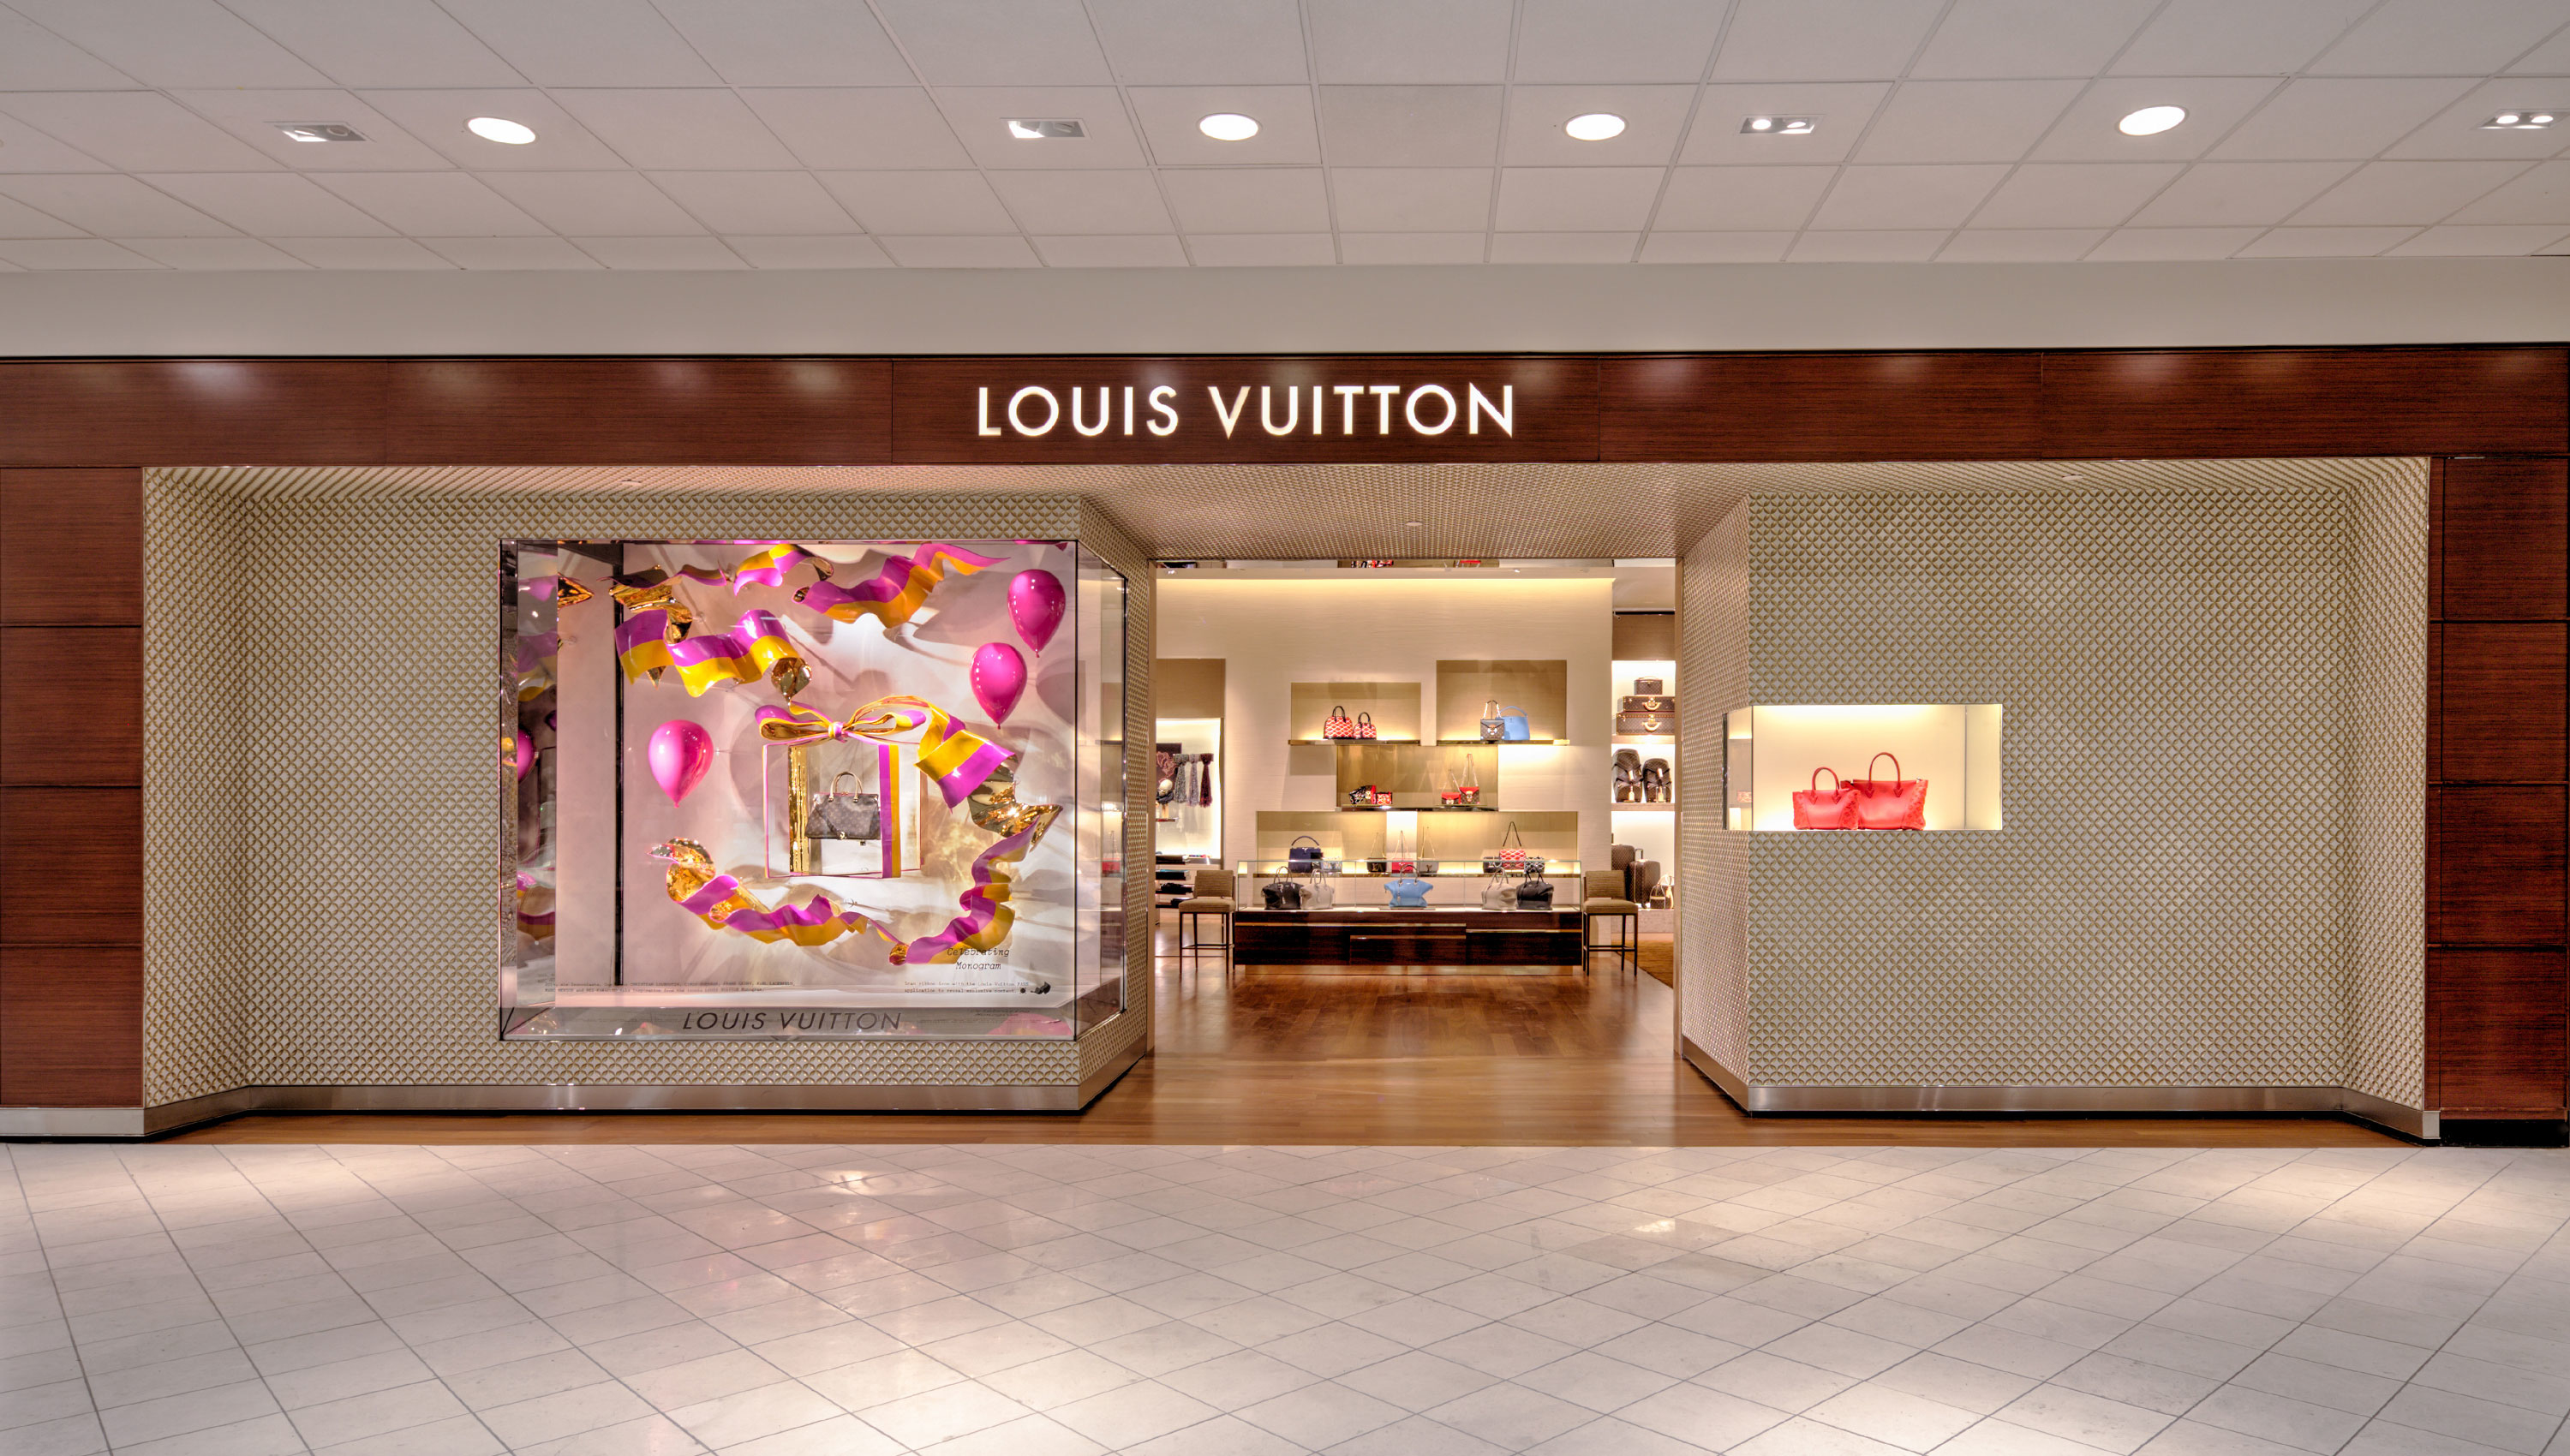 Louis Vuitton Indianapolis Saks Coupons near me in Indianapolis, IN 46240 | 8coupons